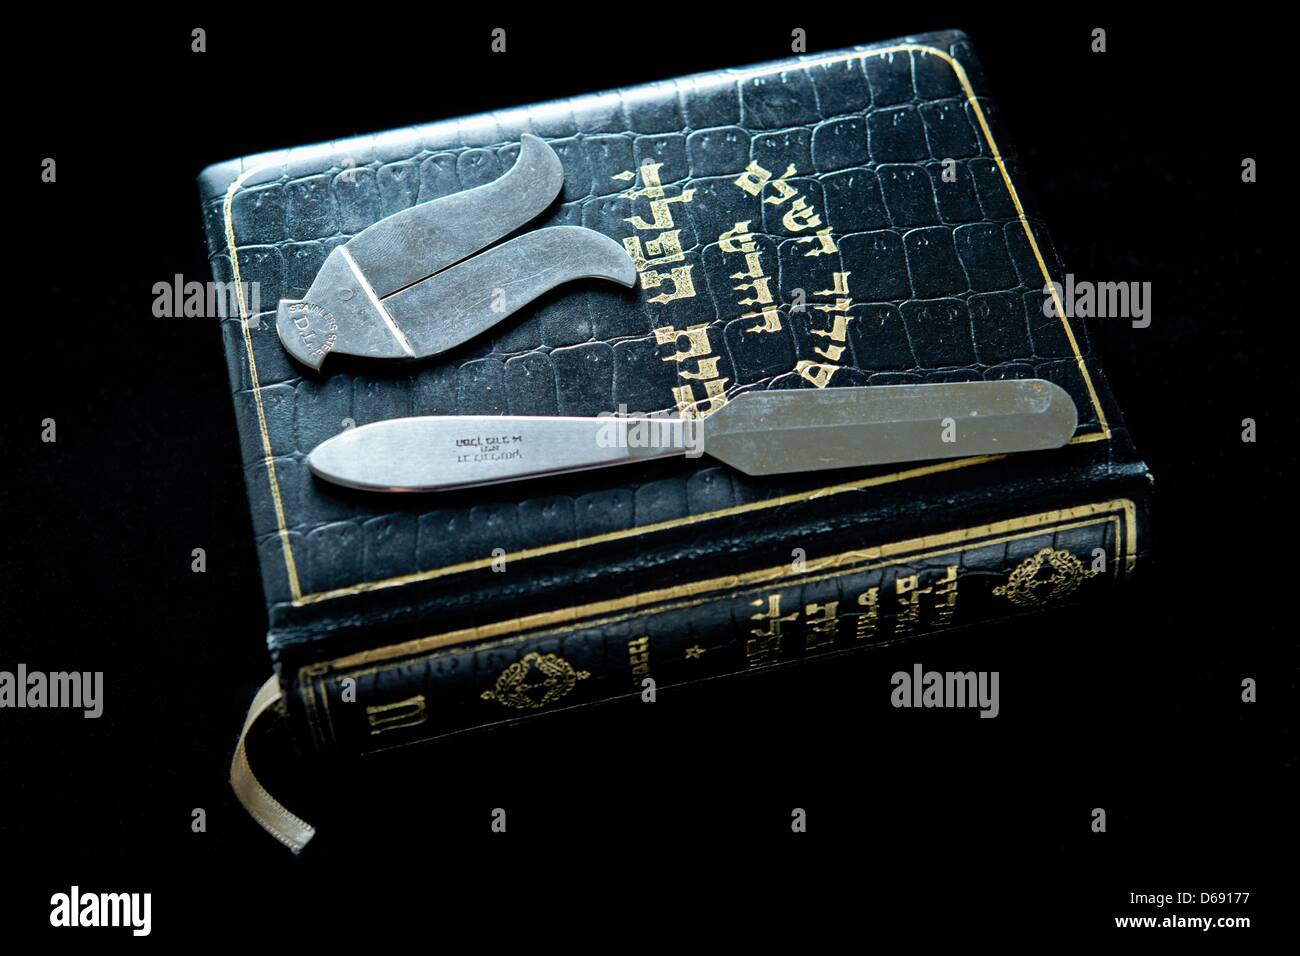 Instruments used in the Jewish religious circumcision ceremony brit milah, a knife and a foreskin guard, lie on a jewish prayer book in the rooms of the Israeli religious community in Hof, Germany, 26 July 2012. Photo: David Ebener Stock Photo